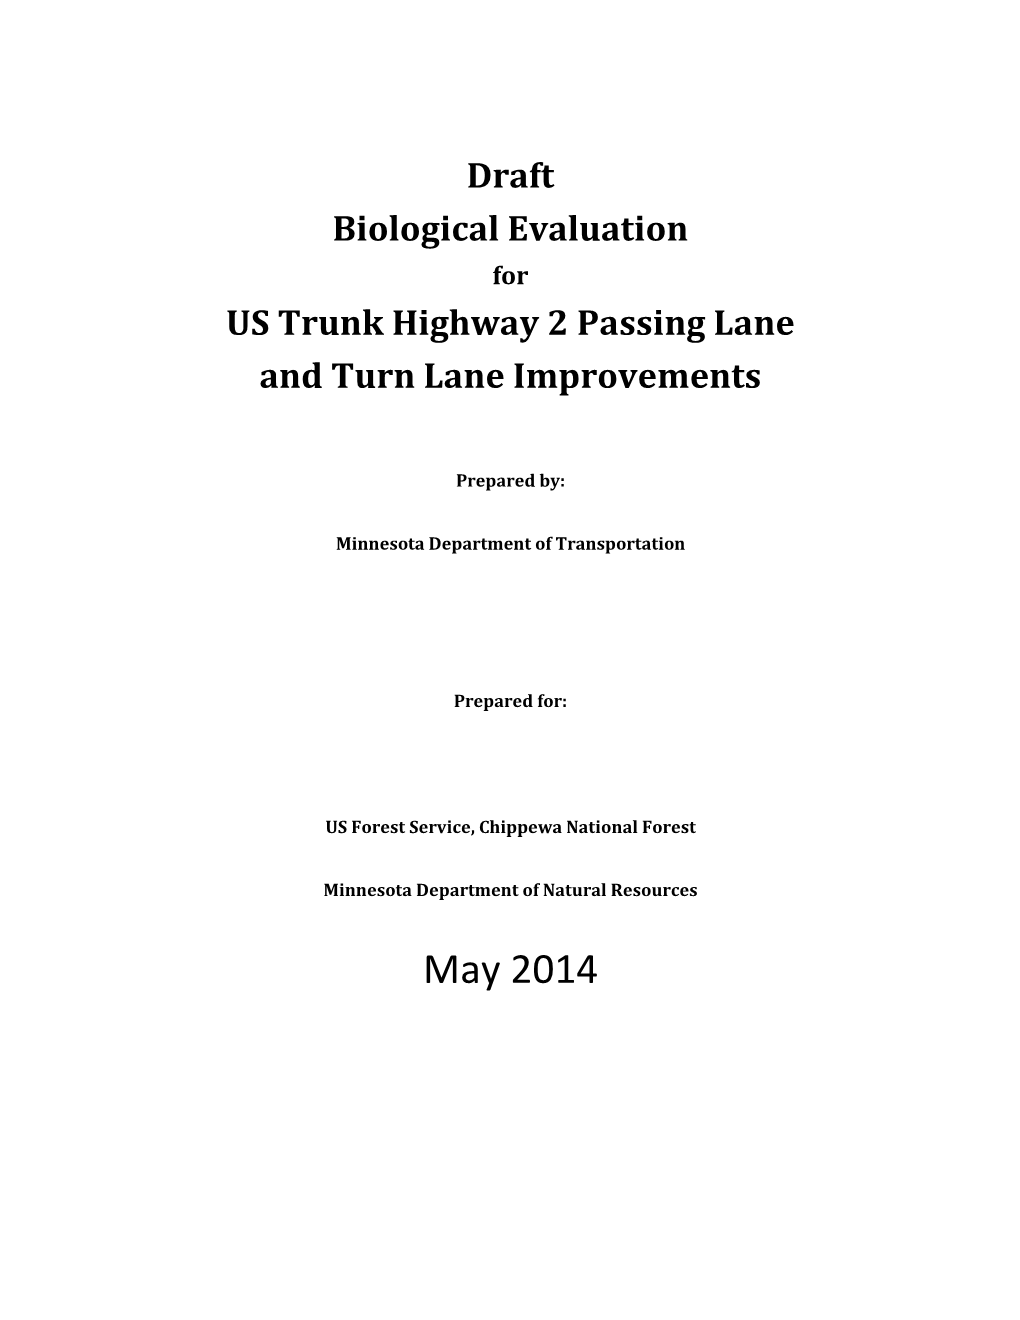 Biological Evaluation for US Trunk Highway 2 Passing Lane and Turn Lane Improvements